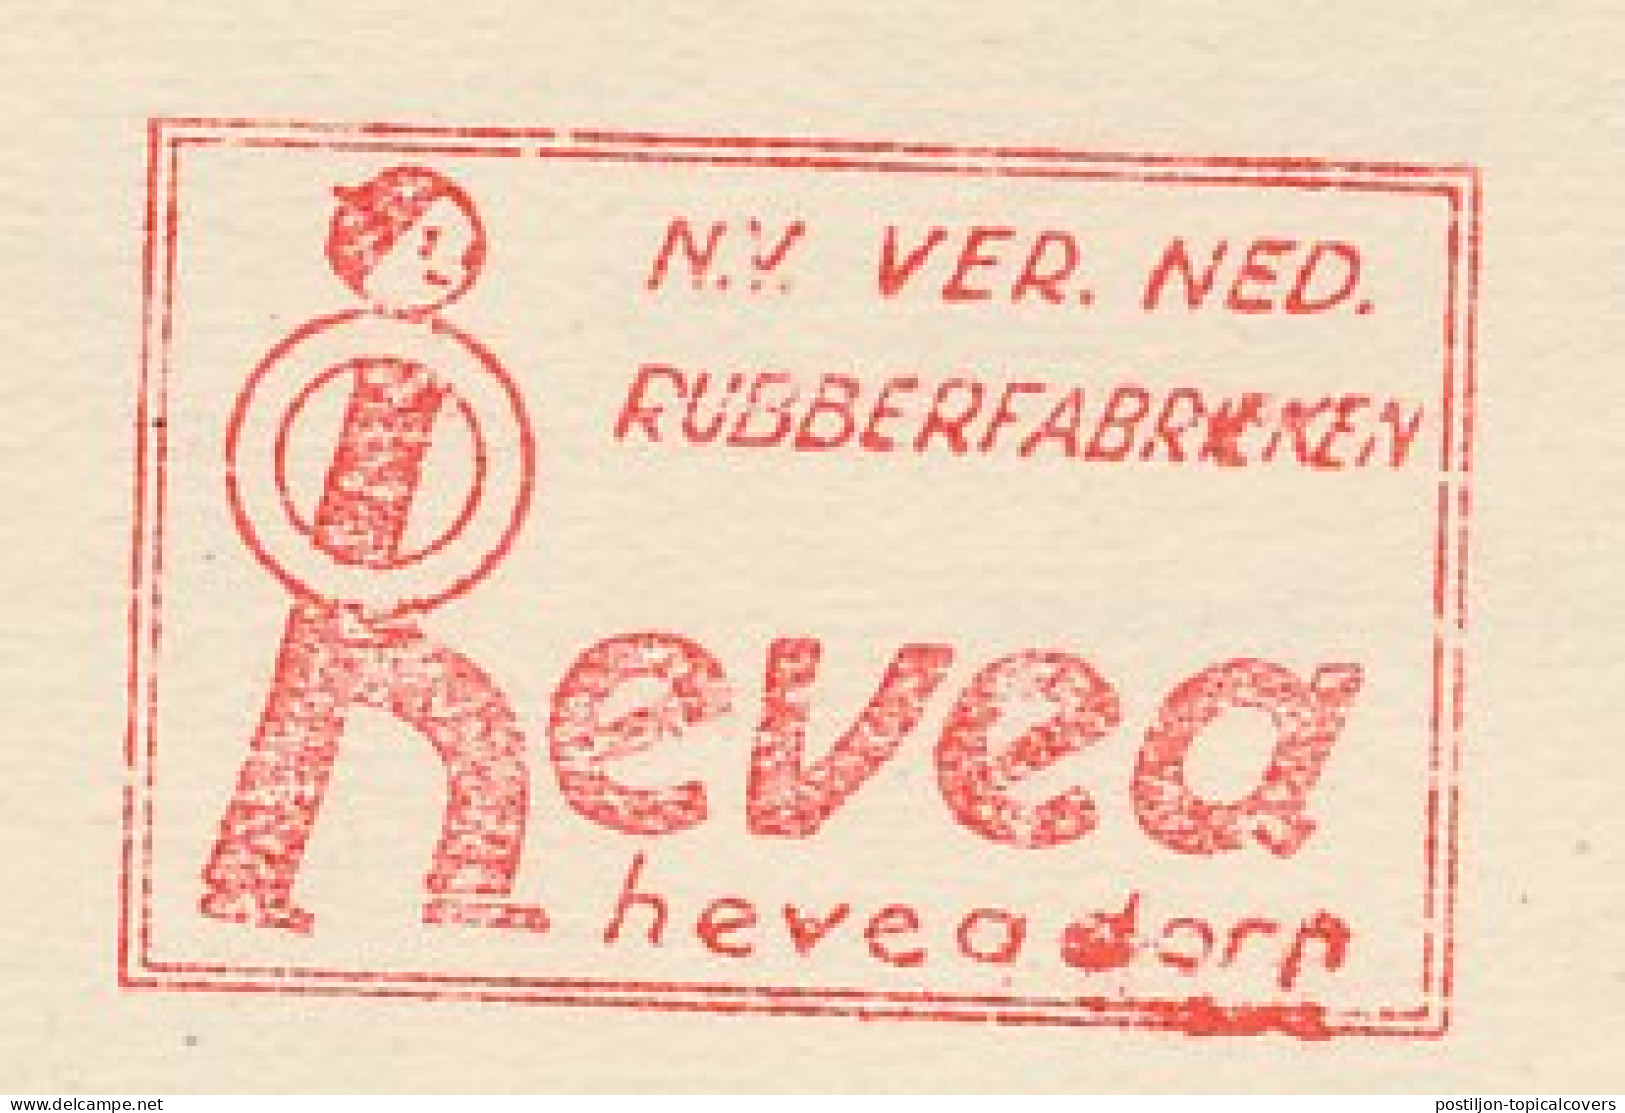 Meter Card Netherlands 1943 Rubber Factory - Heveadorp - Trees